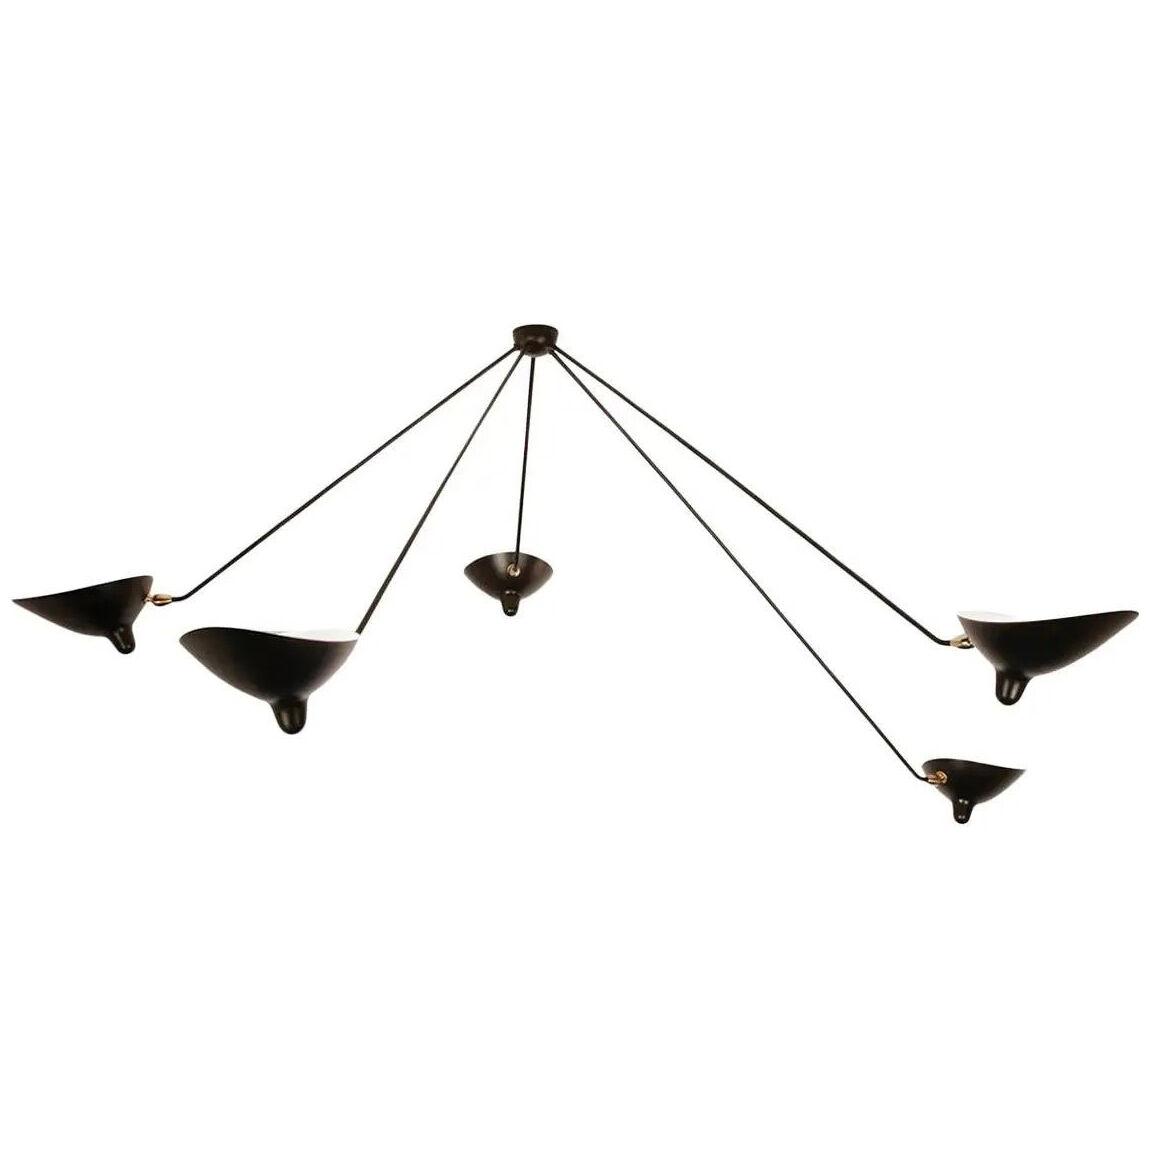 Serge Mouille Mid-Century Modern Black Five Fixed Arms Spider Ceiling Lamp